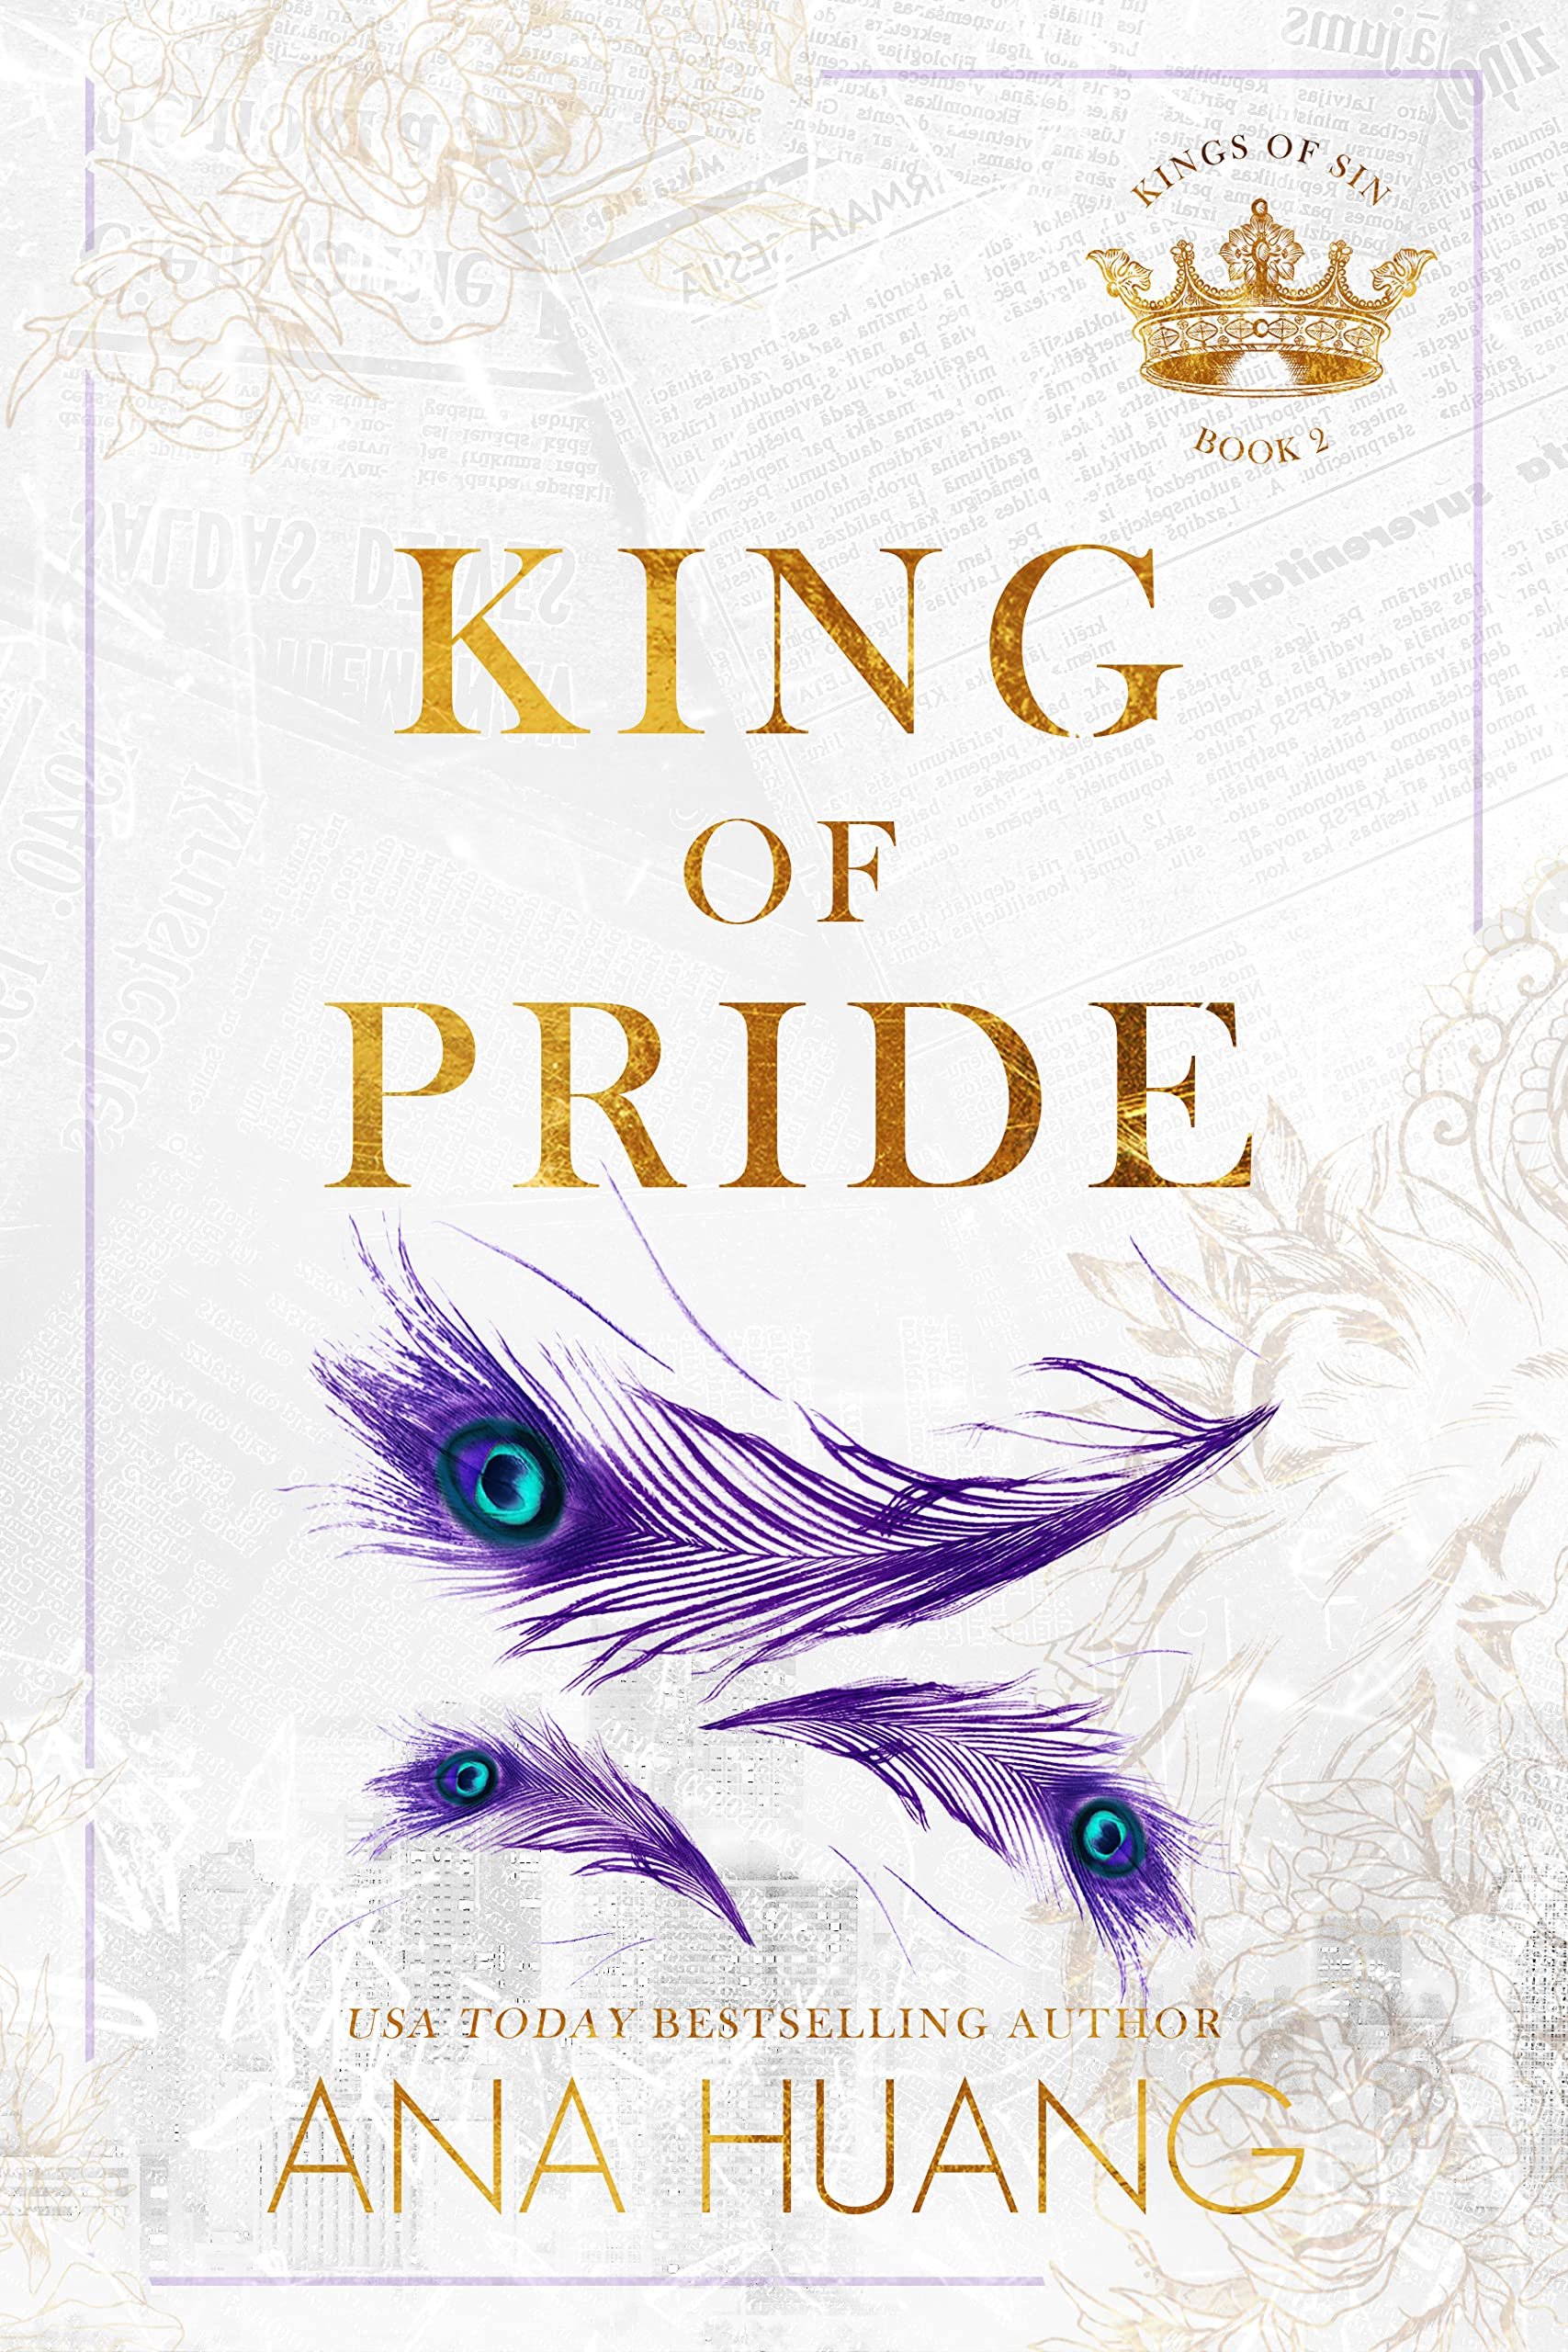 King of Pride: An Opposites Attract Romance (Kings of Sin Book 2) Cover